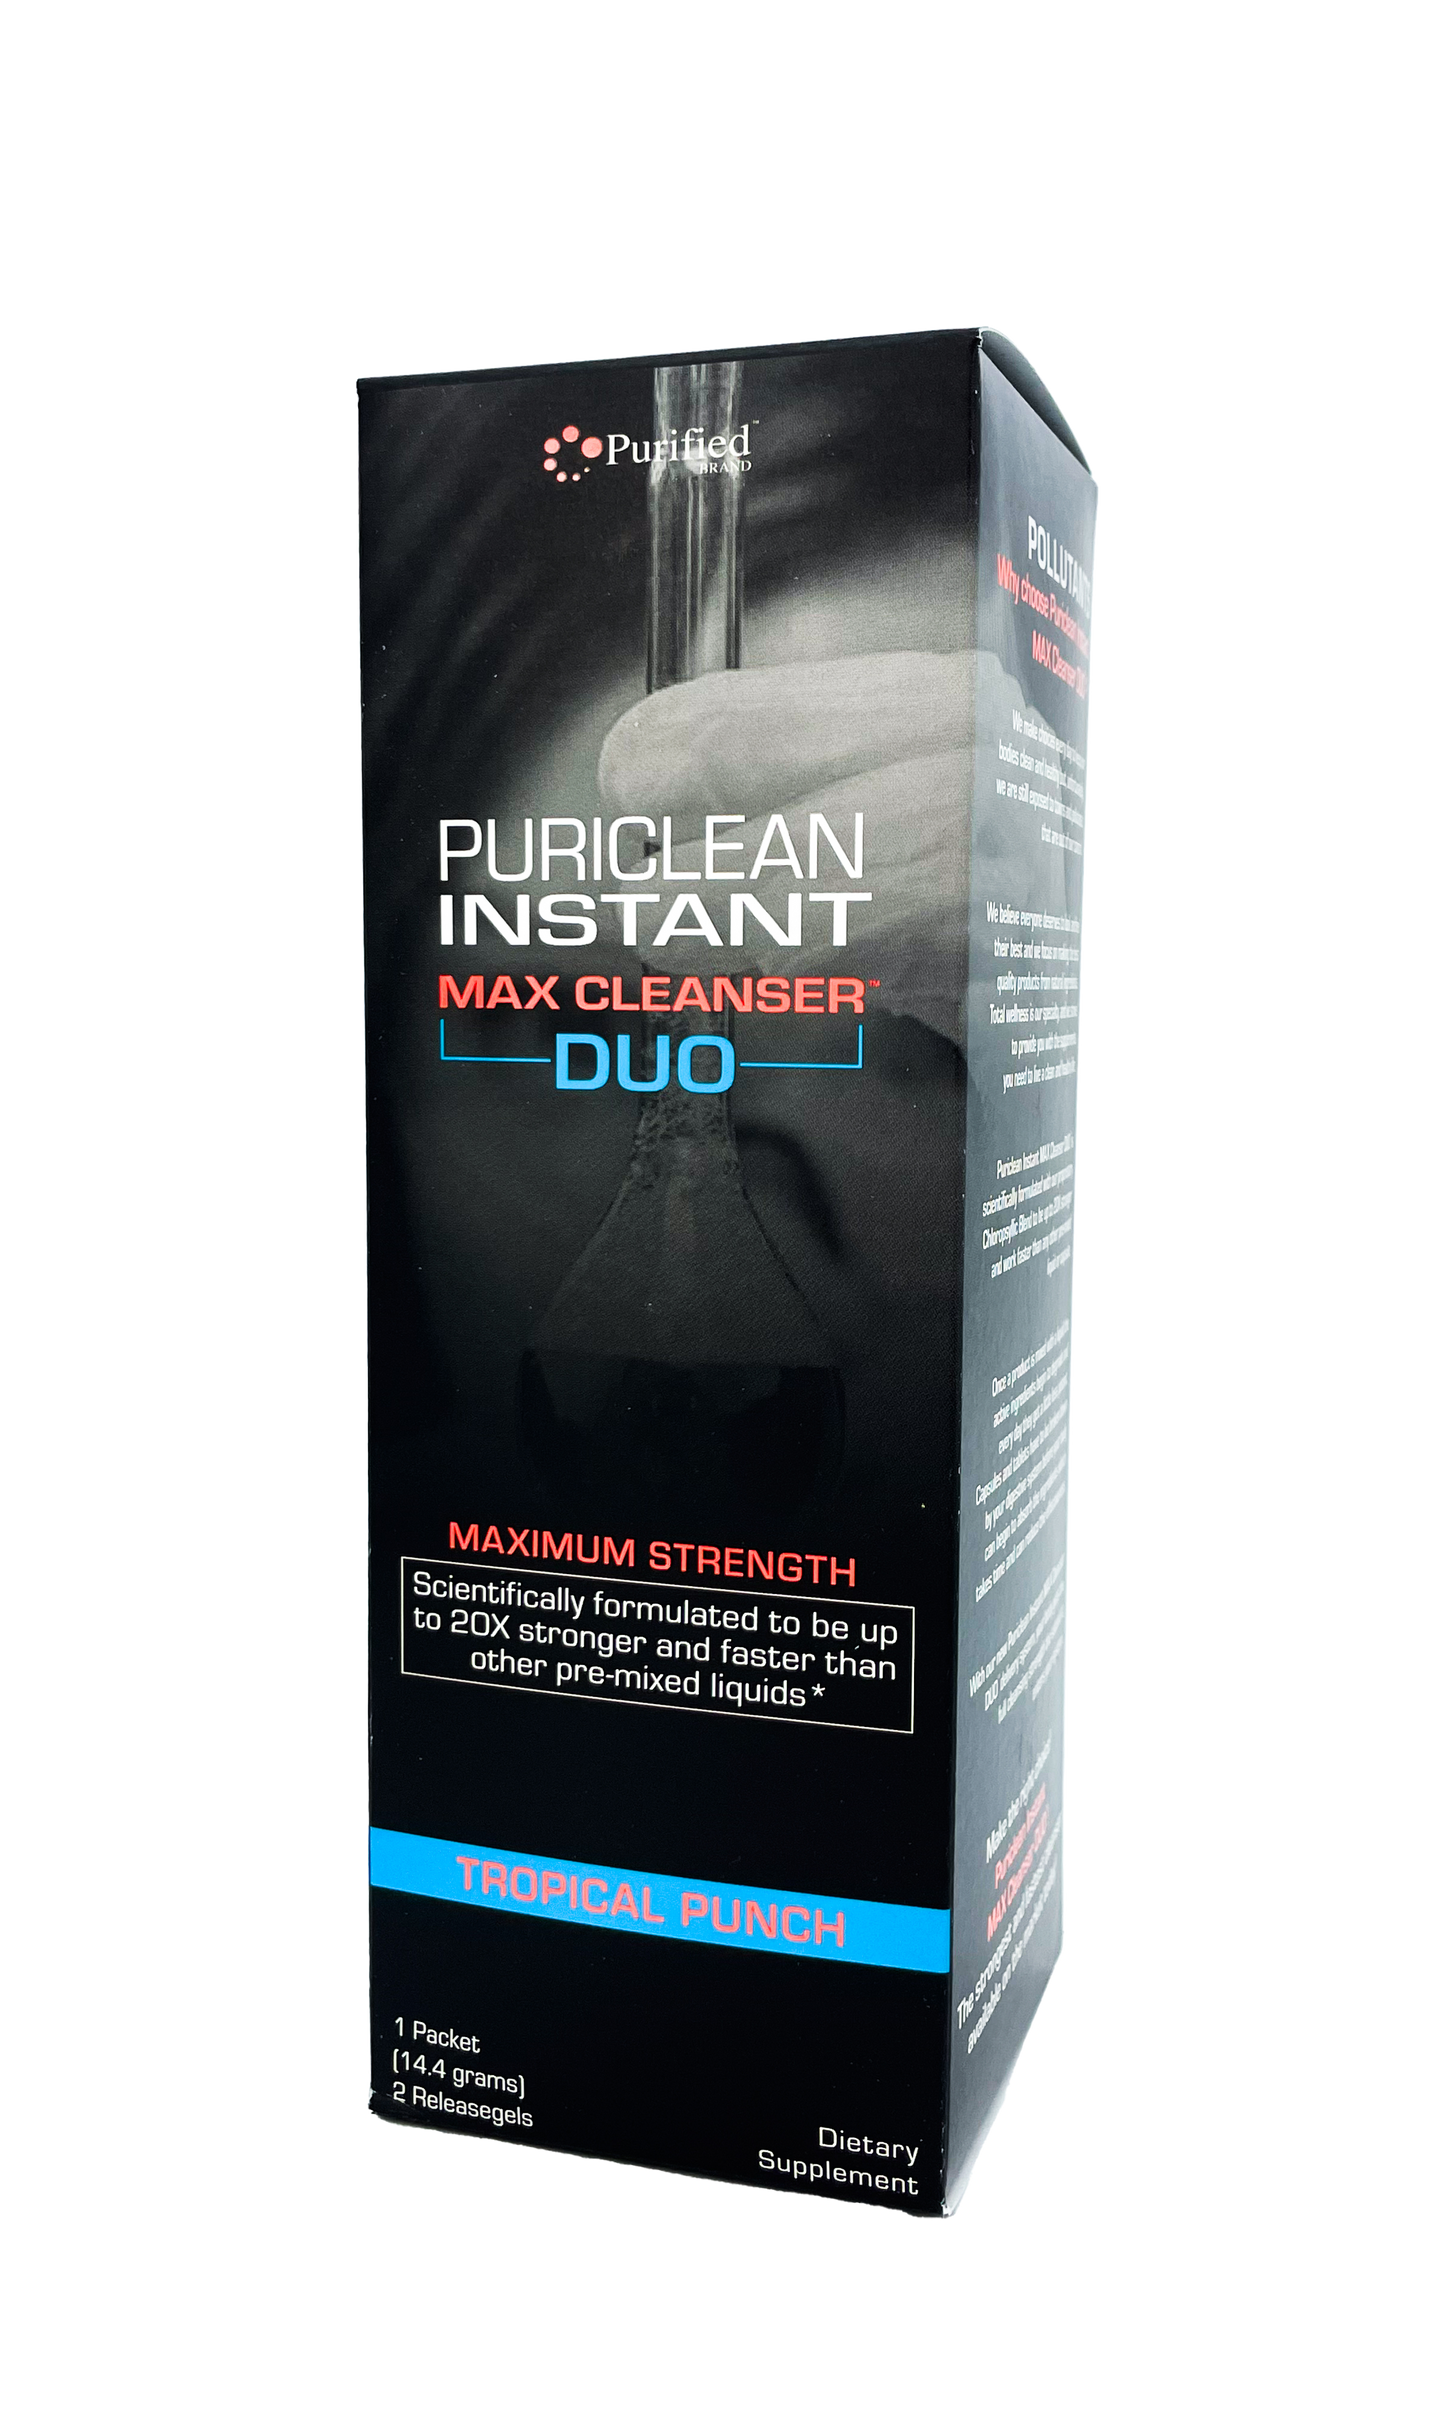 Puriclean Instant - Max Cleanser Duo